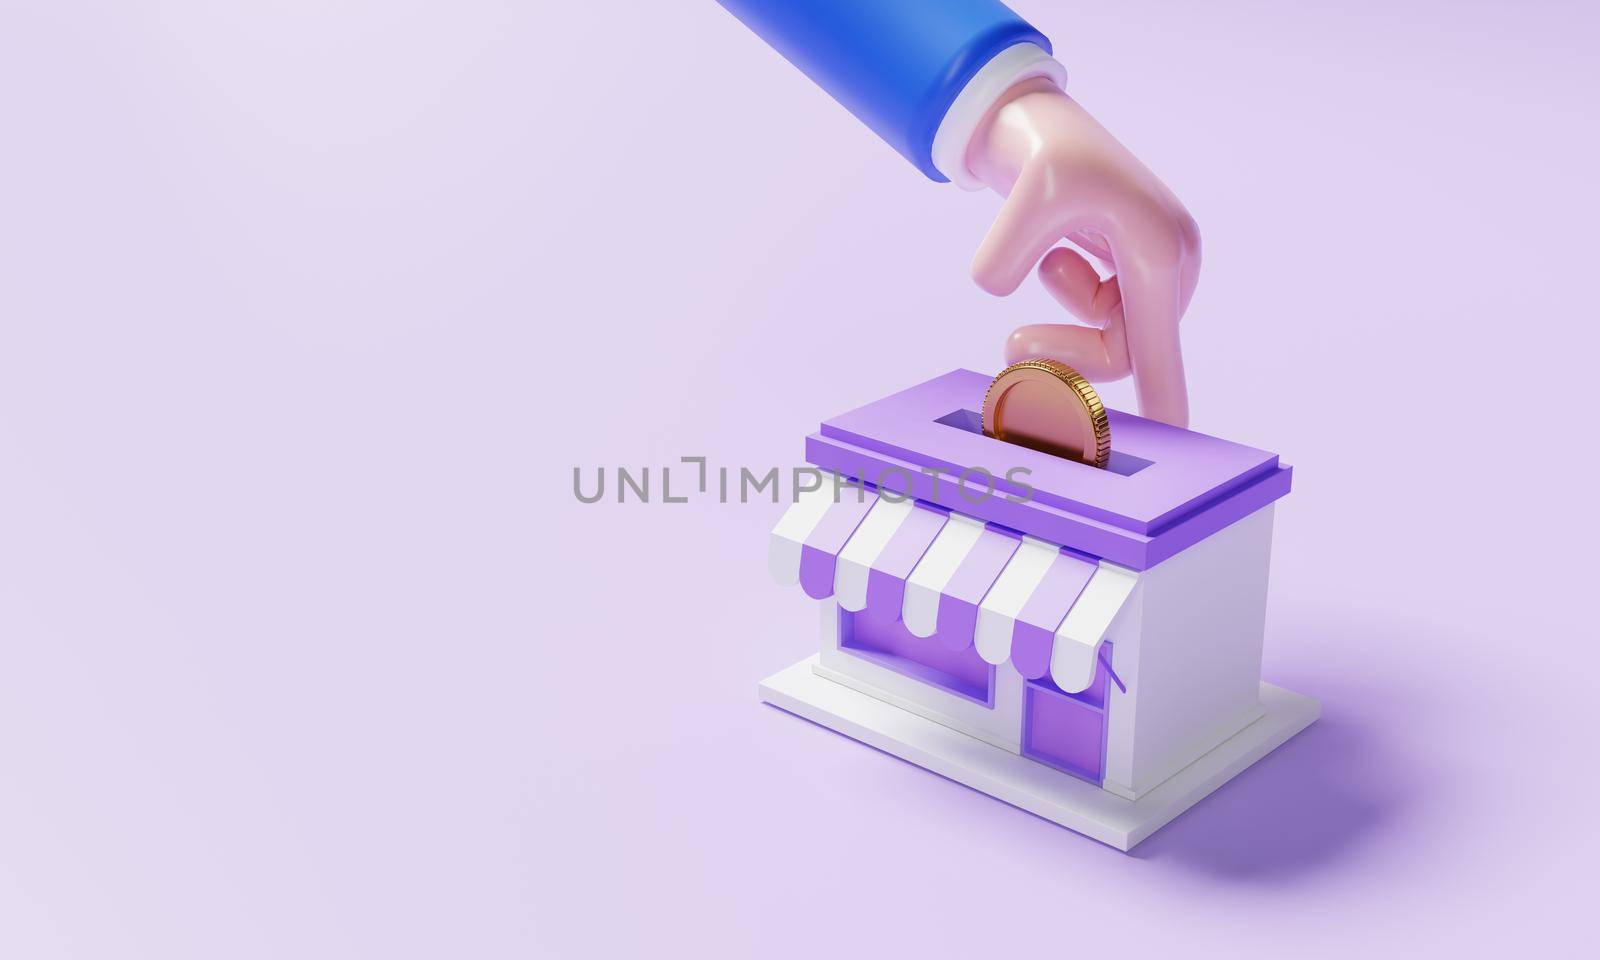 Collect money from a start-up business mini-mart that owns a business with businessman hand as an entrepreneur. Financial economy e-commerce and money-saving money concept. 3D illustration rendering